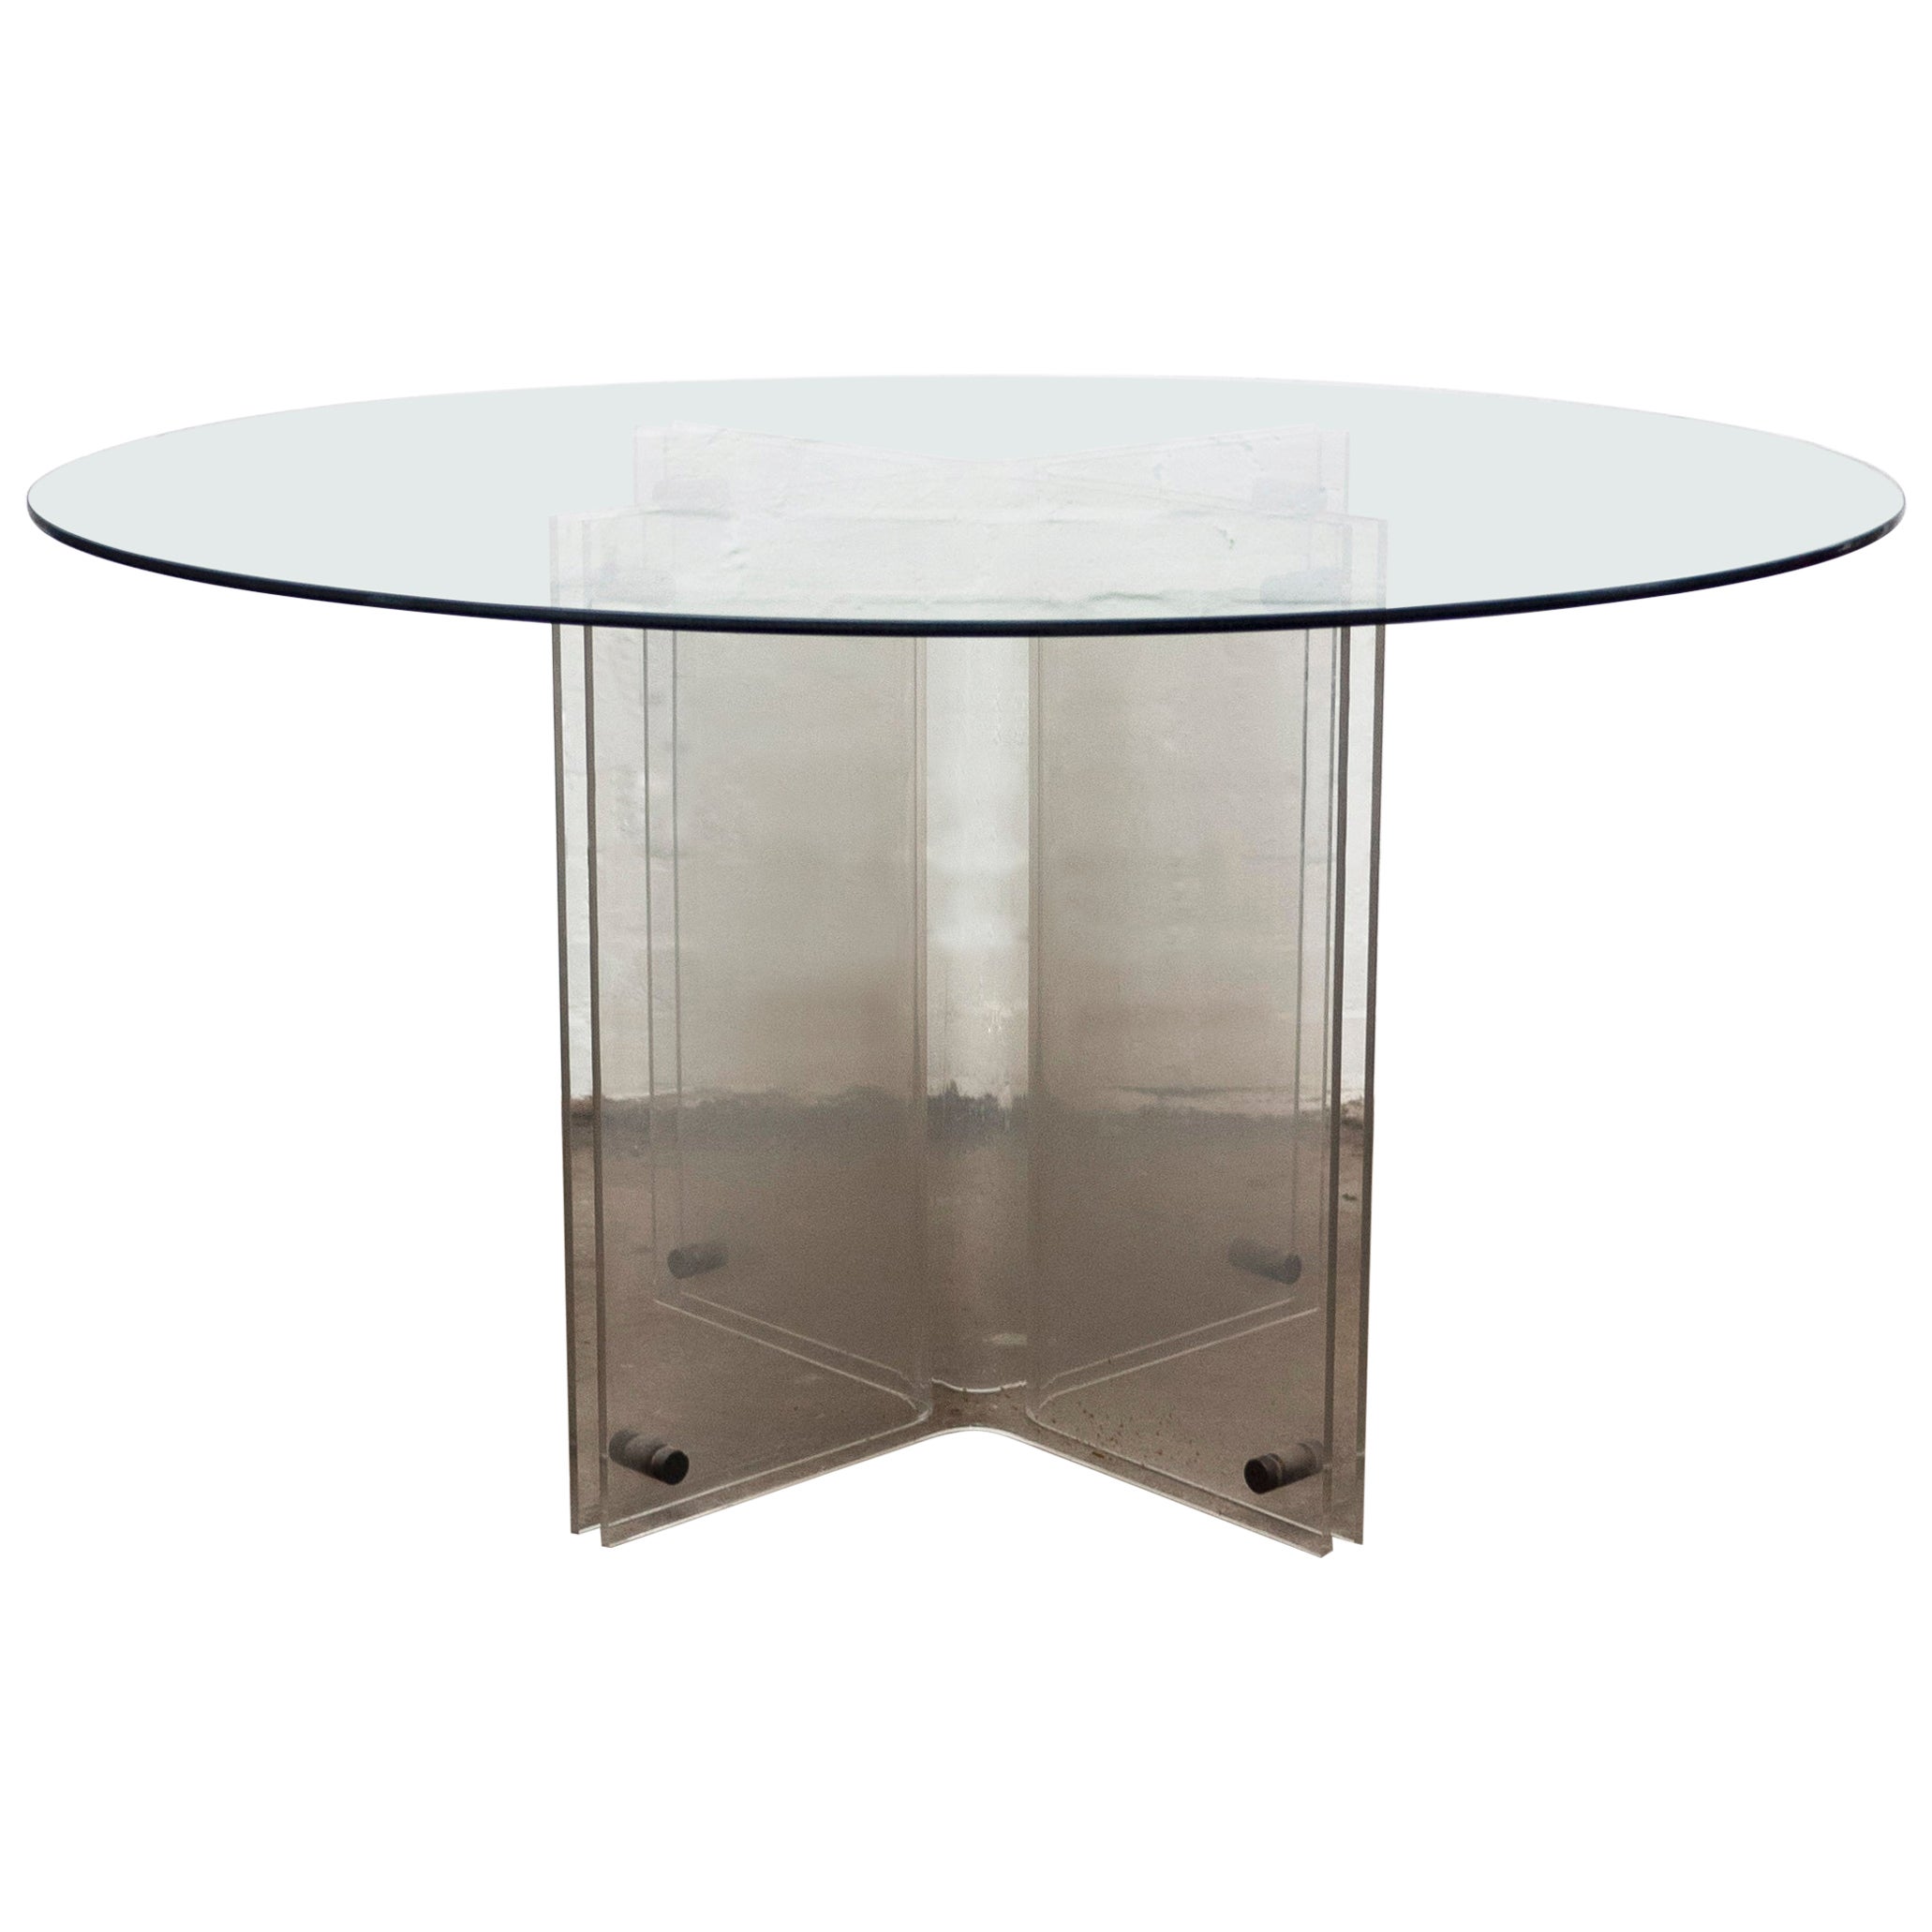 Vintage Hollywood Regency Lucite and Glass Round Dining Table, 1980s For Sale